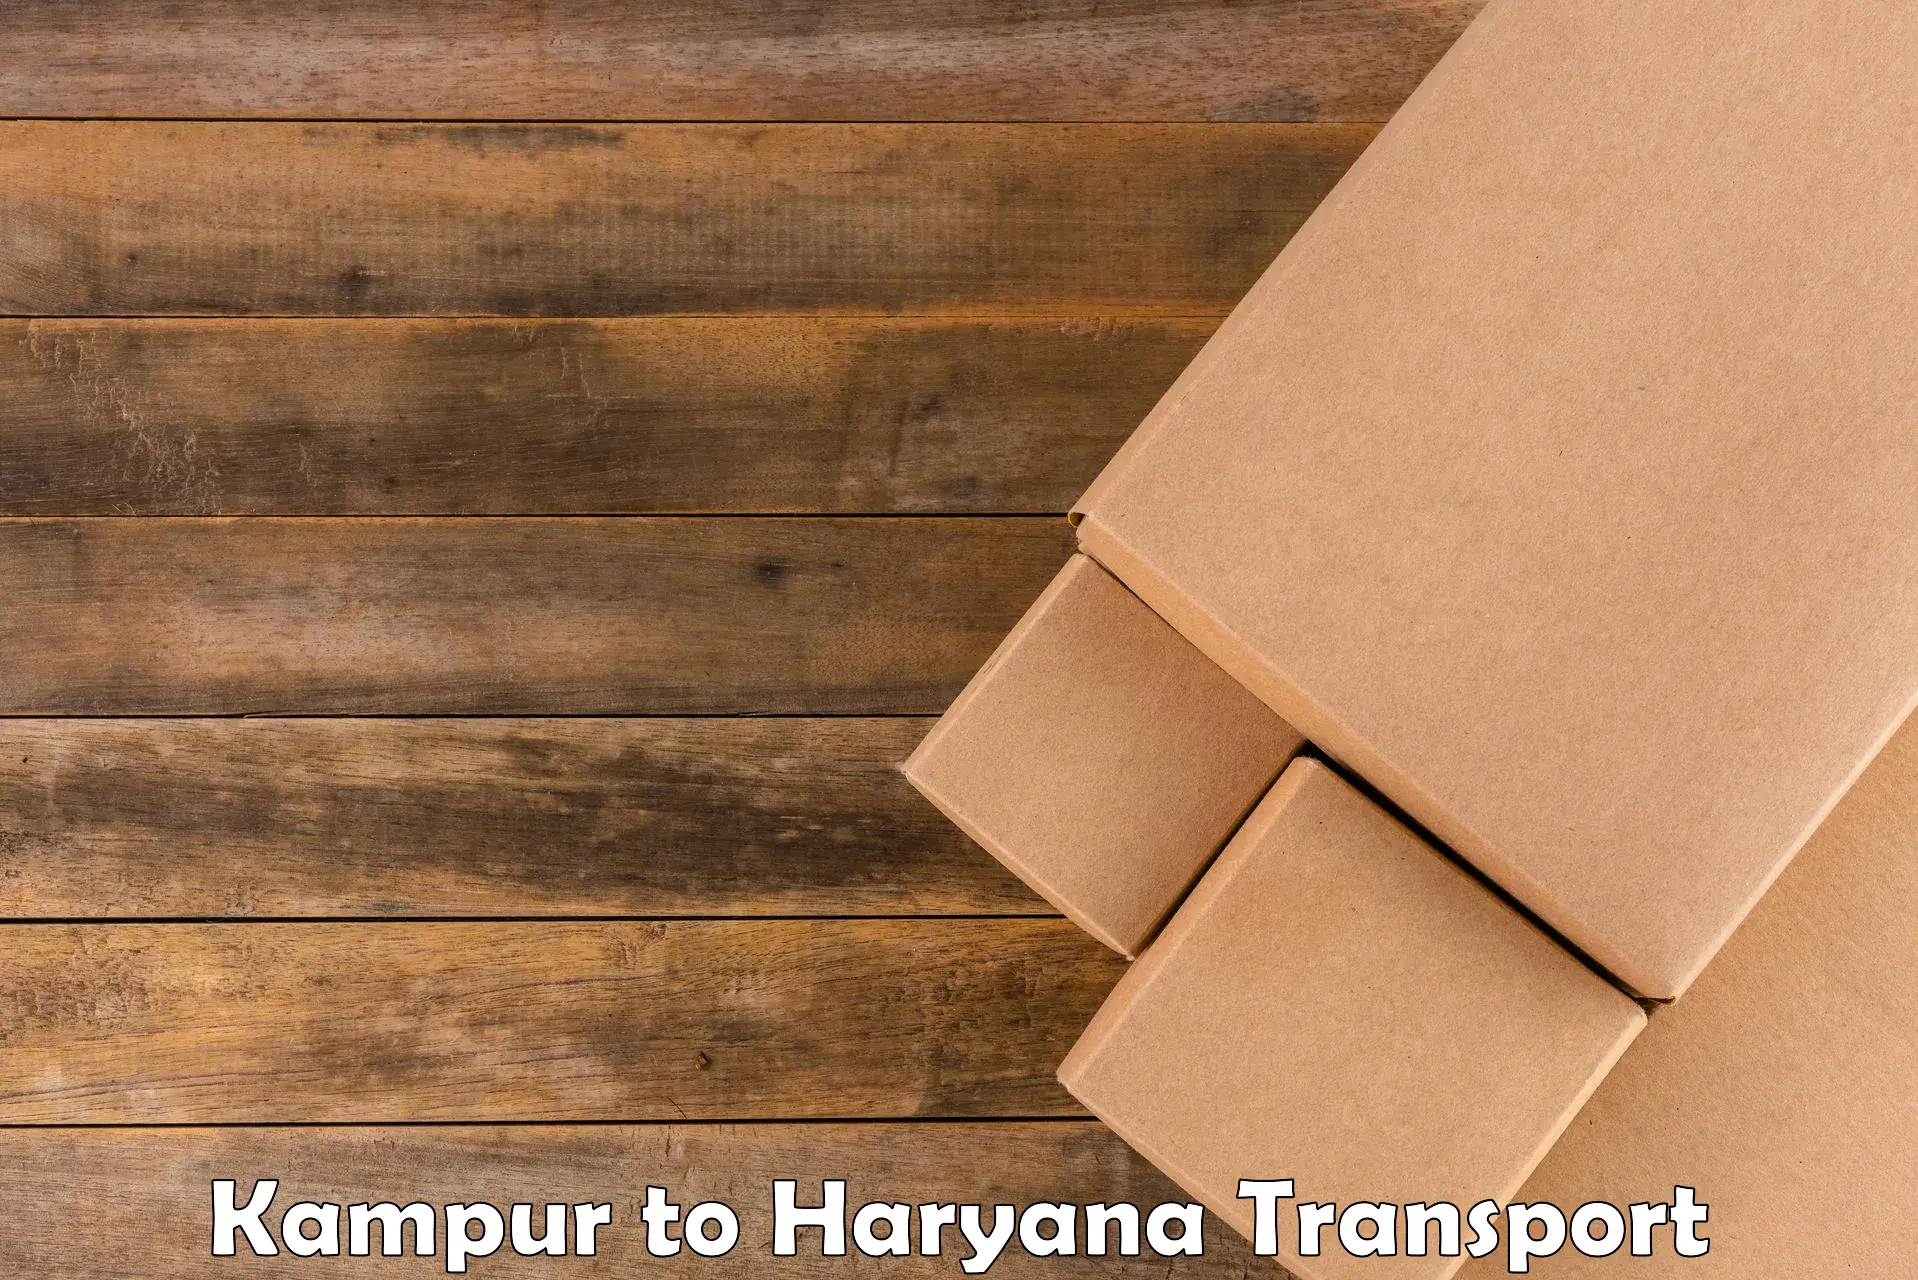 Daily parcel service transport Kampur to Haryana